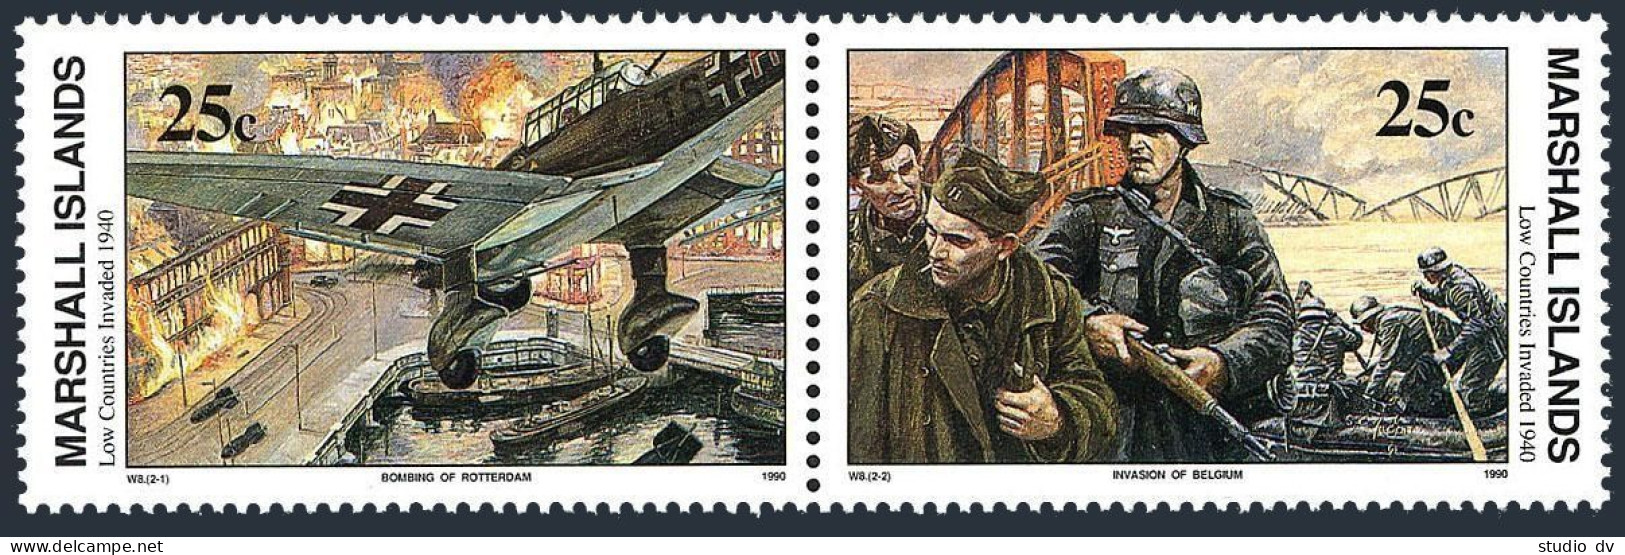 Marshall 249-250a Pair,MNH.Mi 303-304. WW II,Invasion Of The Low Countries,1990. - Marshall Islands